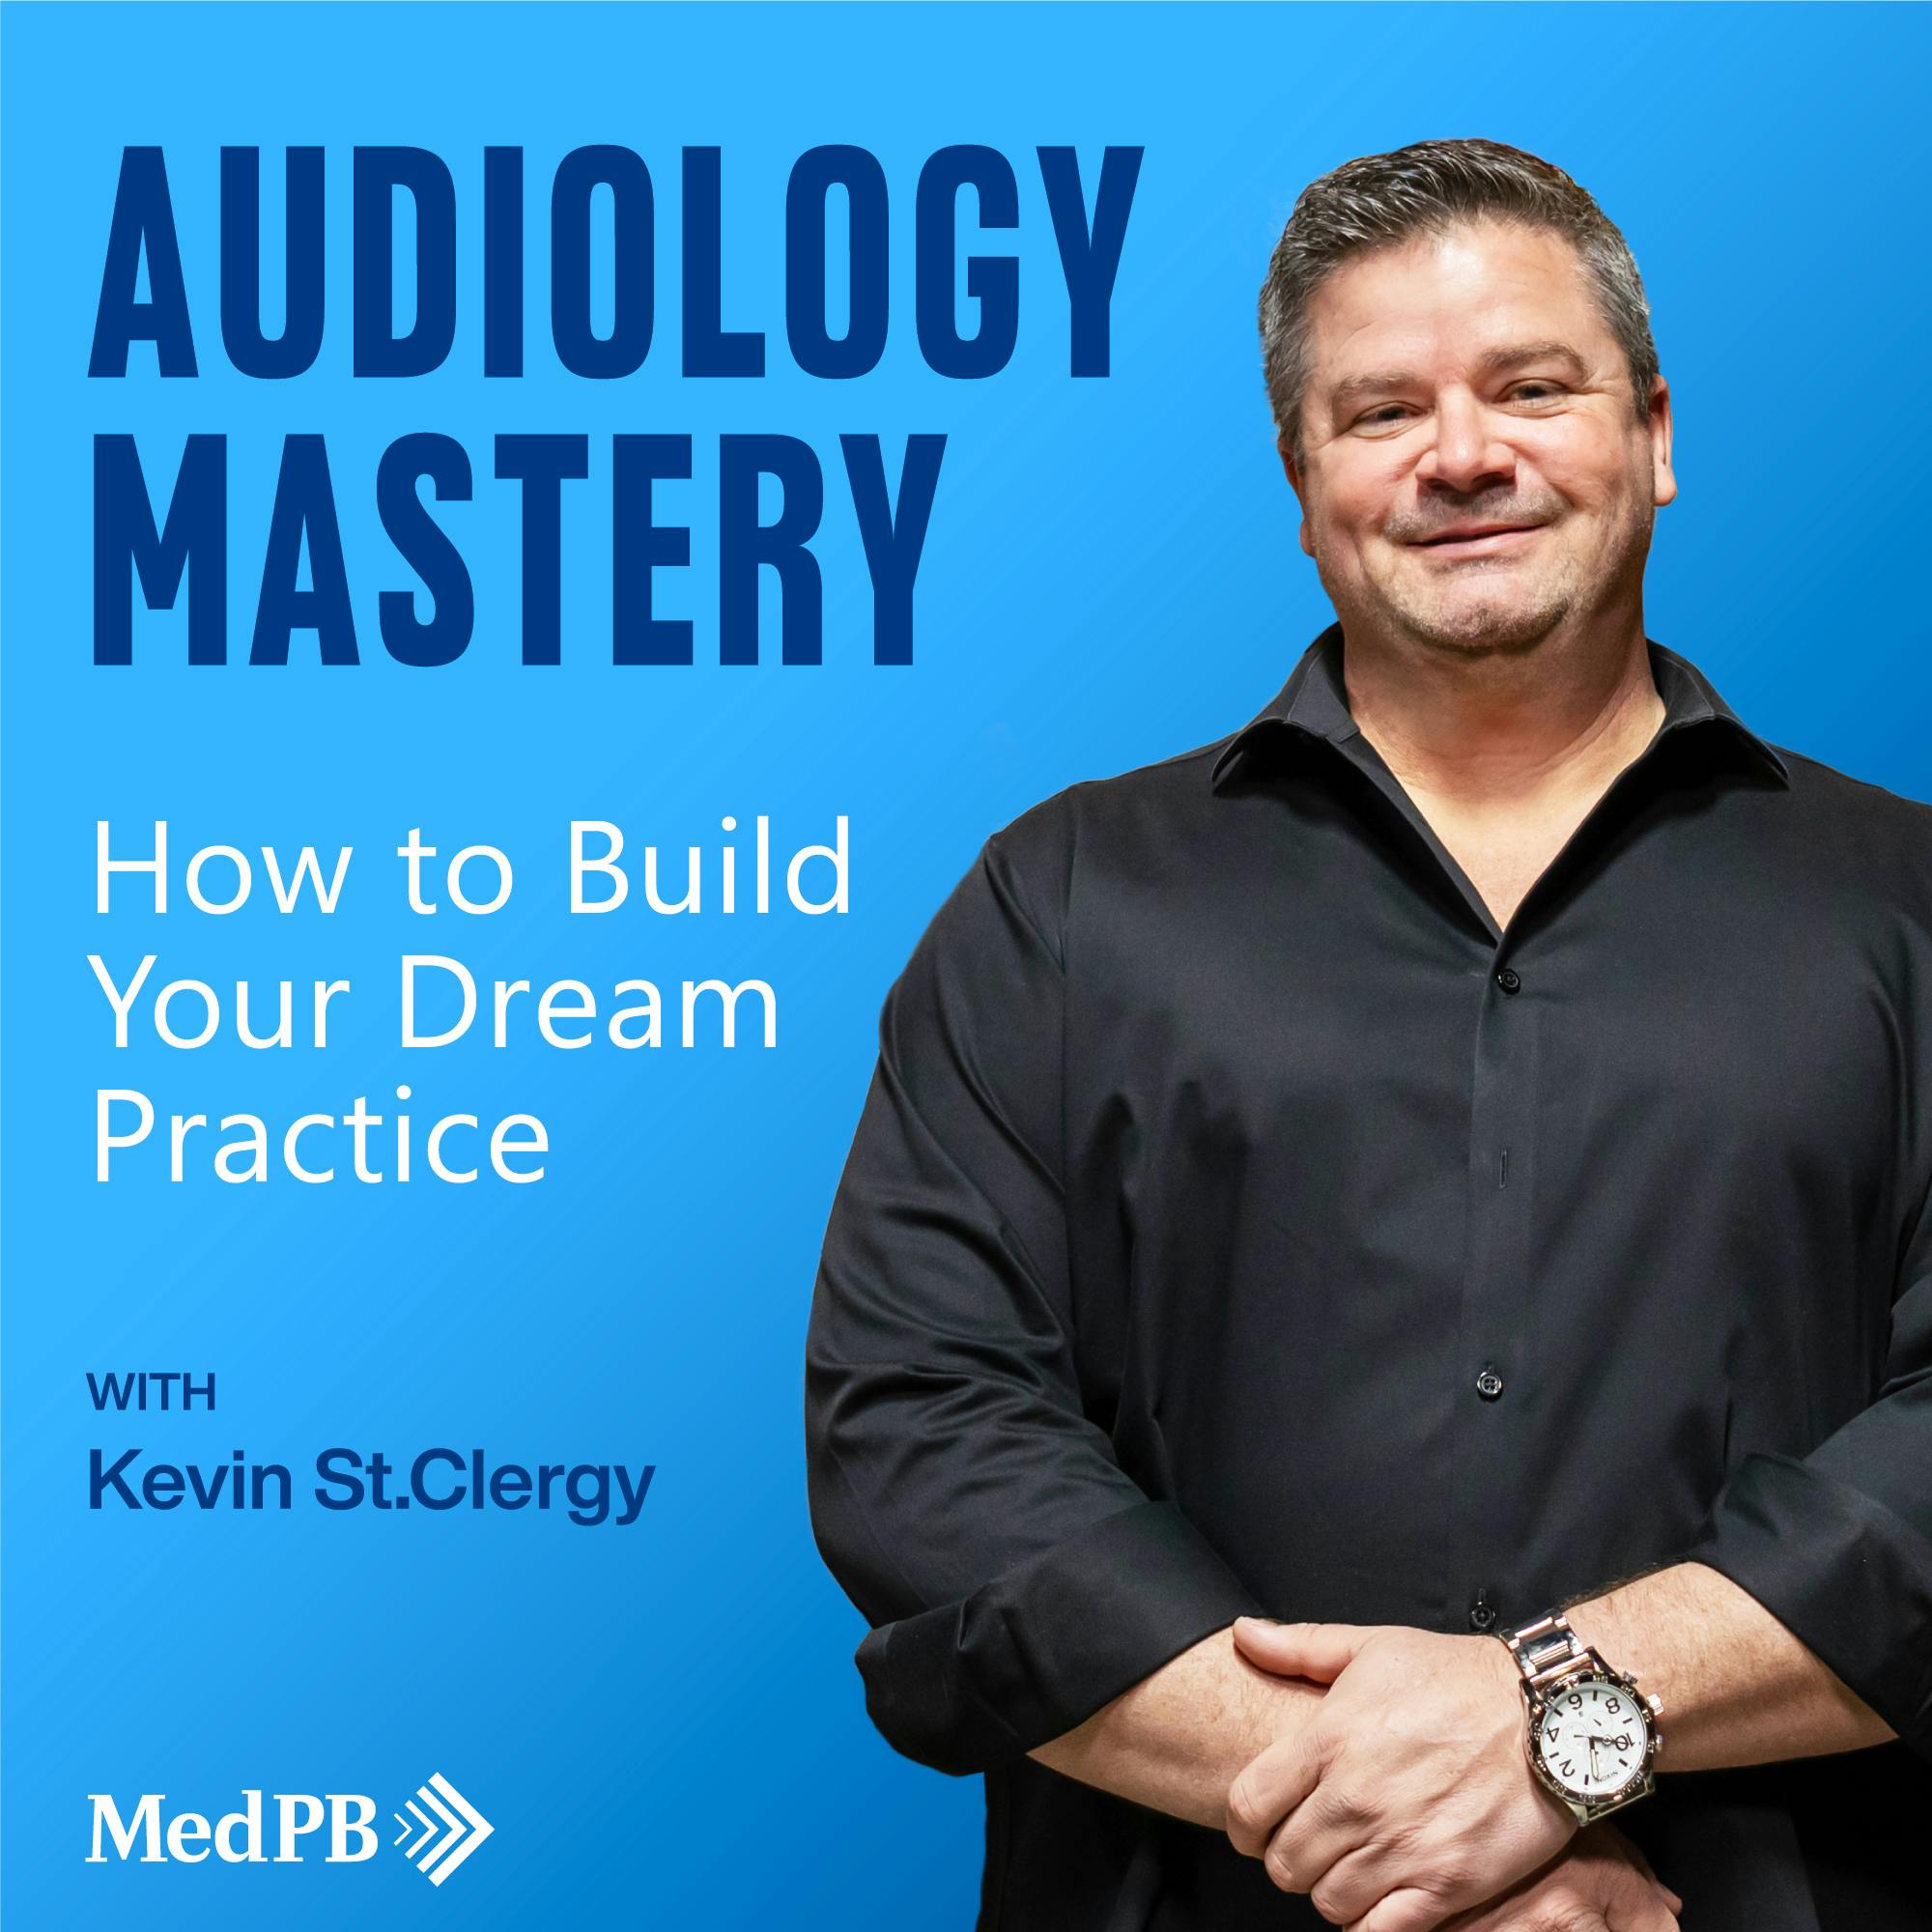 Audiology Mastery: How to Build Your Dream Practice by Kevin St.Clergy | MedPB